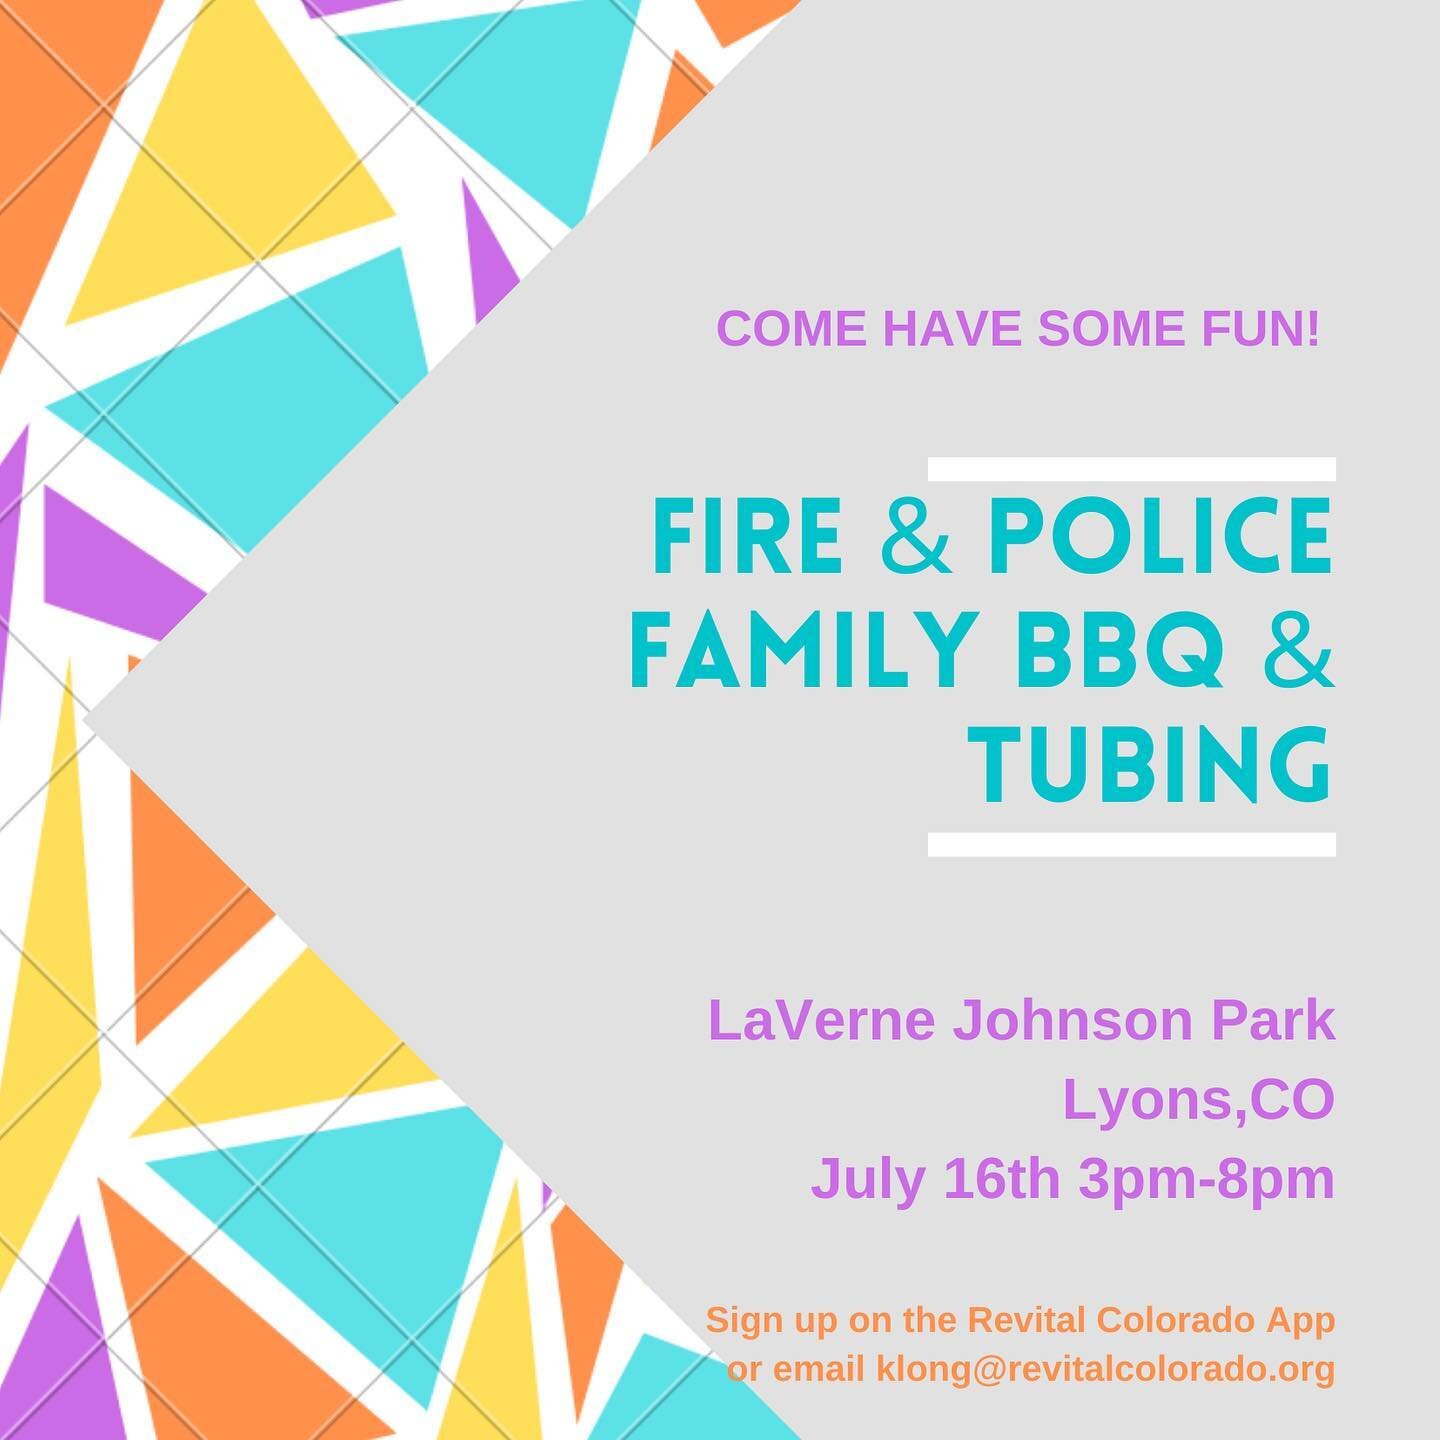 Come join us at this amazing park in Lyons, CO. There&rsquo;s so much to do including tubing down the River. This is for all Fire and police families to get out and have fun with other first responder families. Dinner will be provided! Download the R